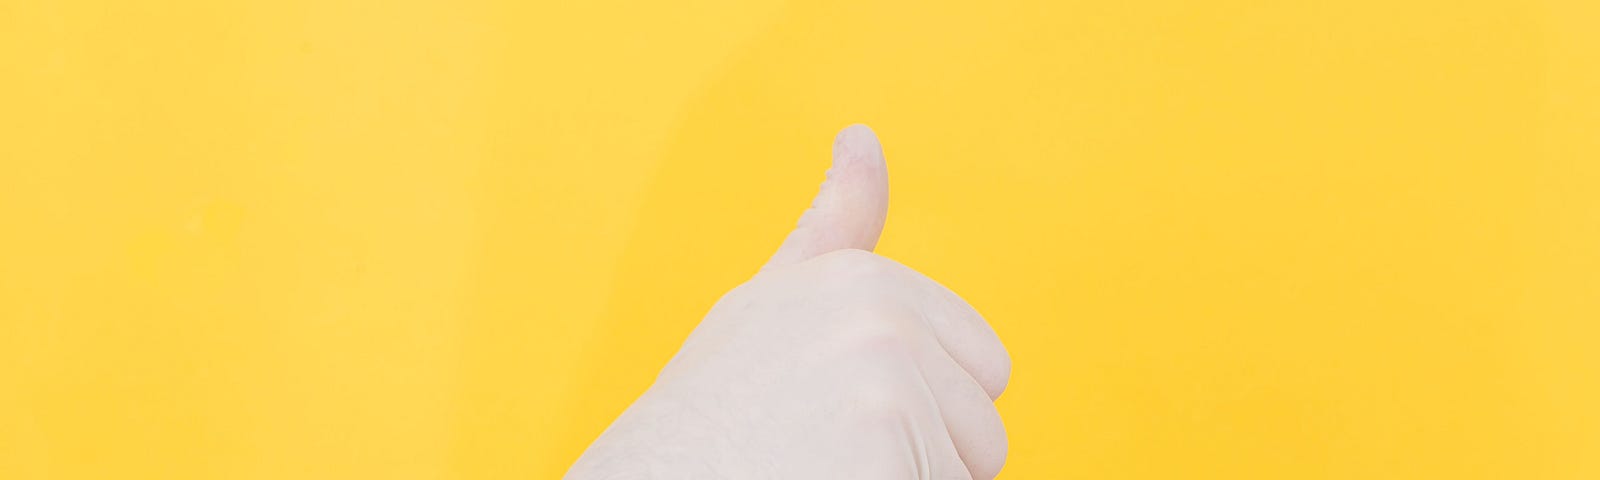 A hand with a latex glove making the thumbs-up sign, over a yellow background